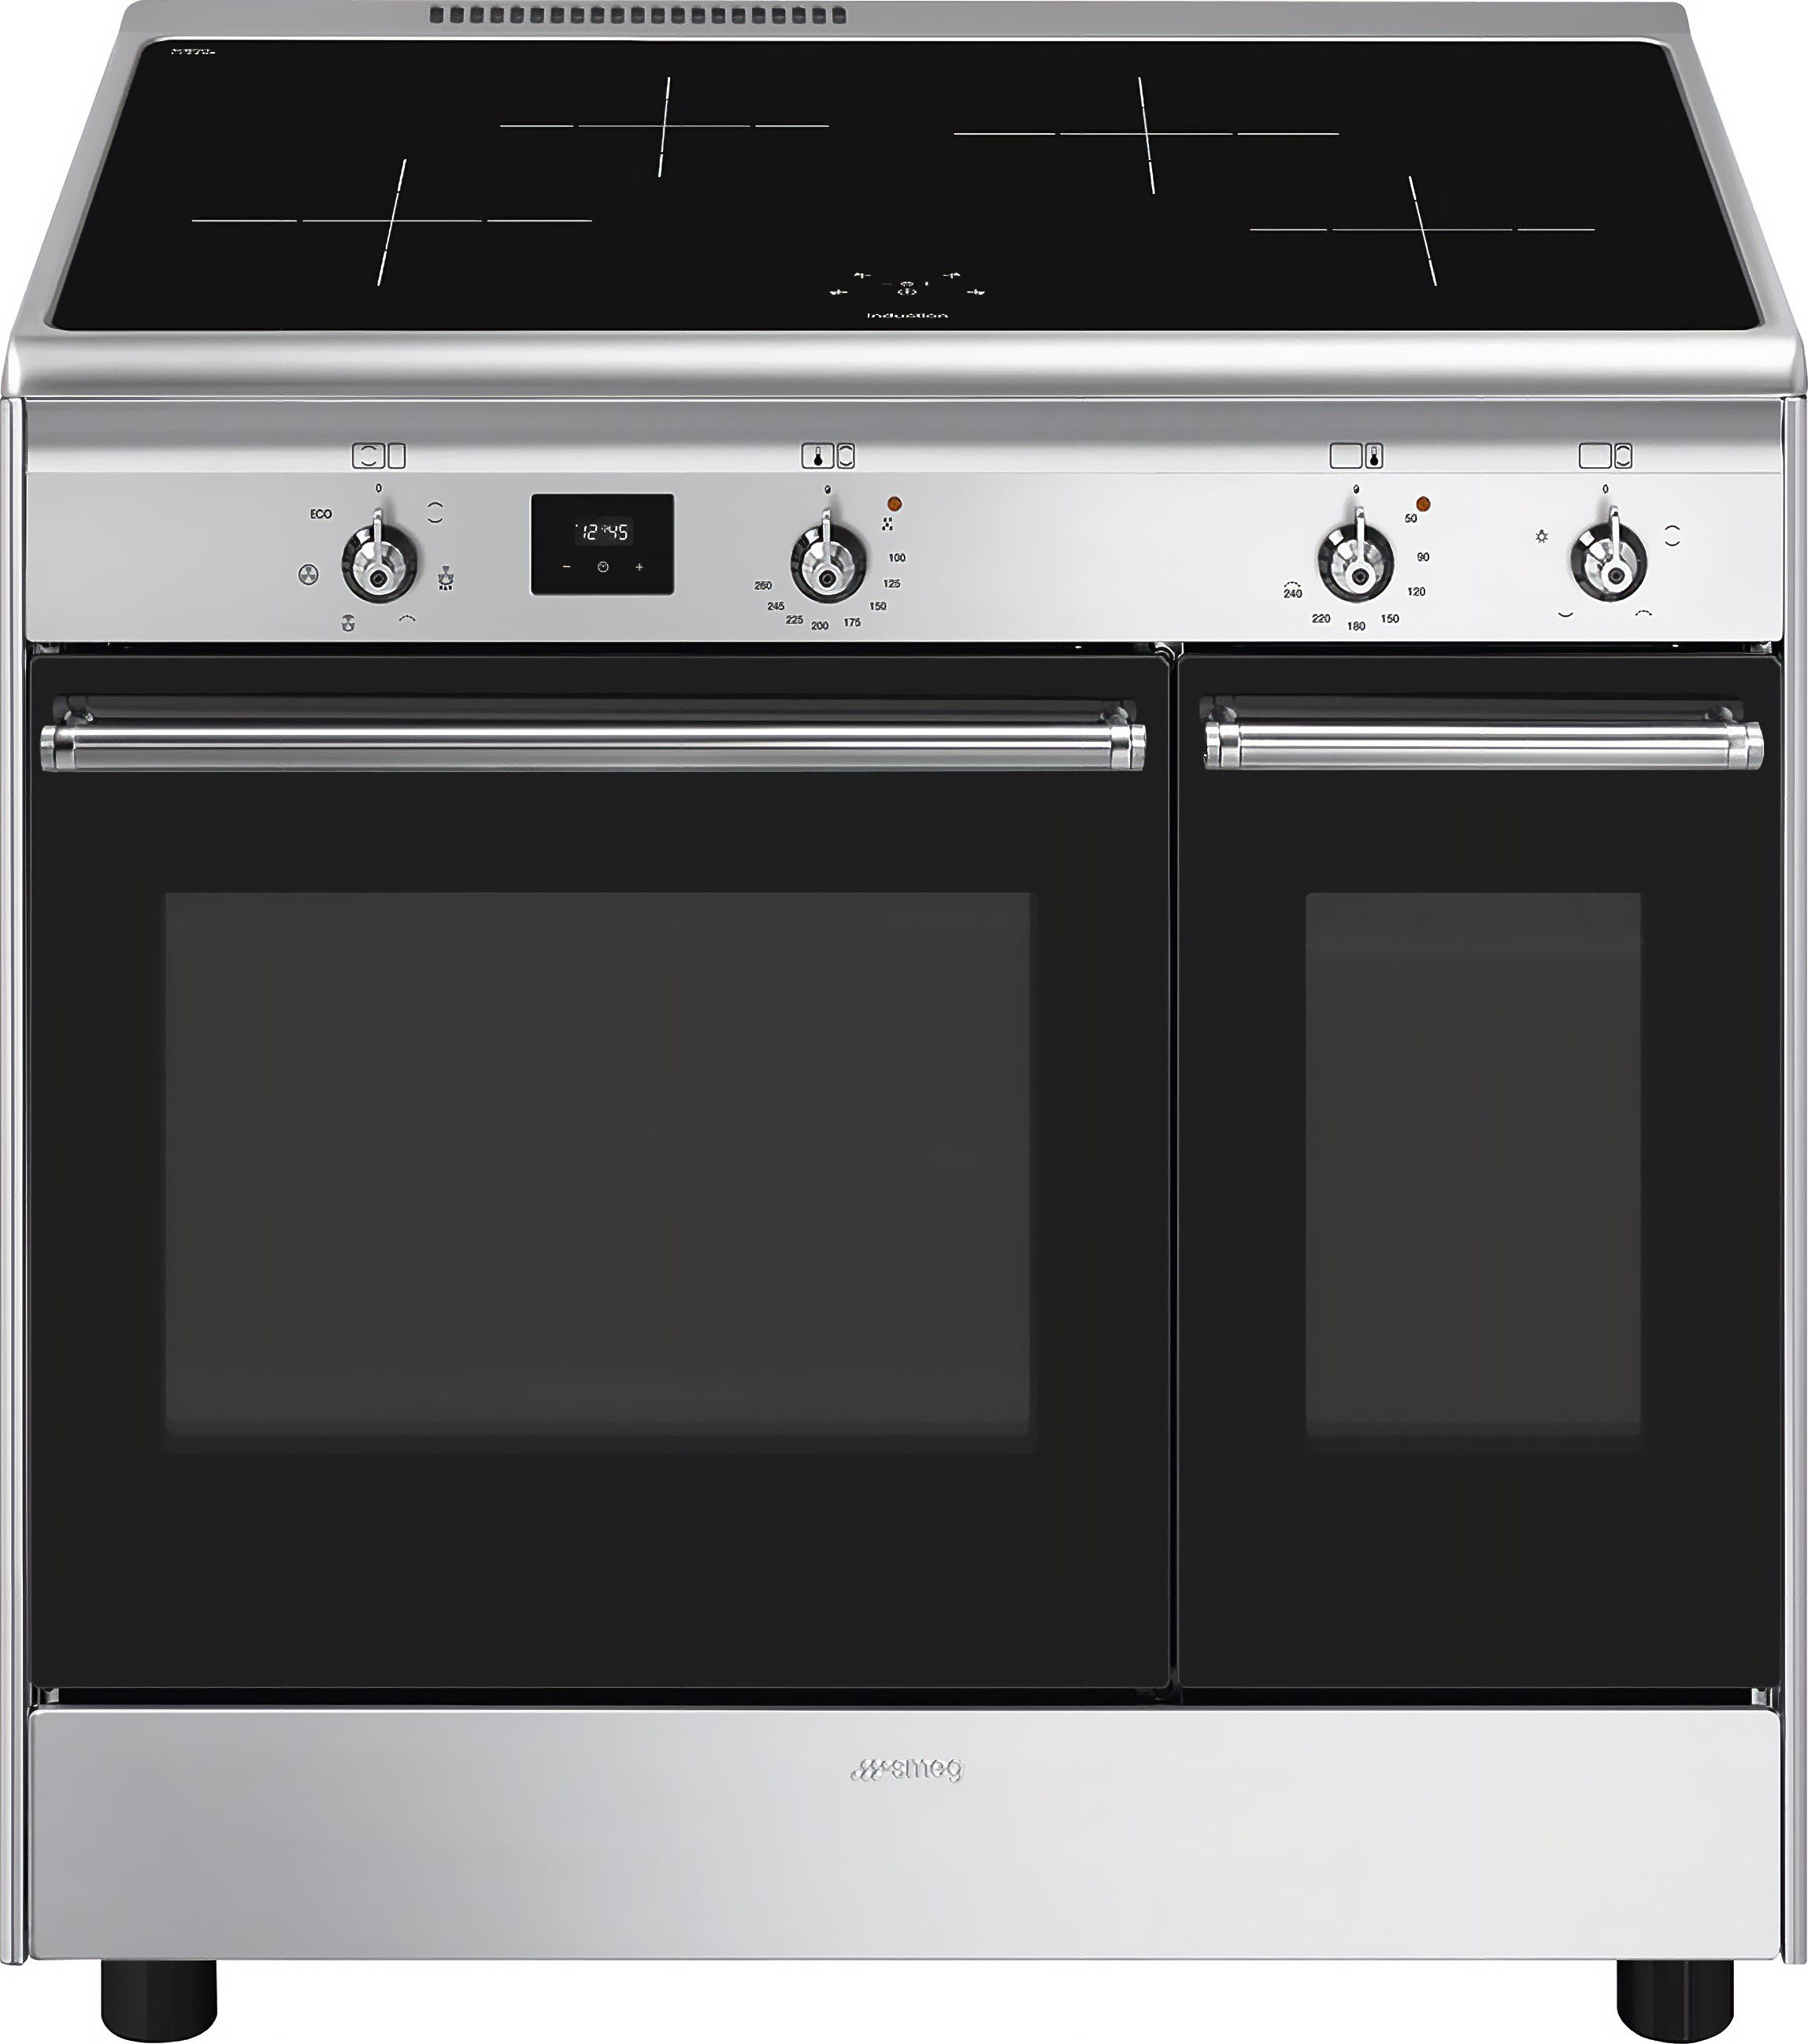 Smeg Concert CX92IM 90cm Electric Range Cooker with Induction Hob - Stainless Steel - A Rated, Stainless Steel